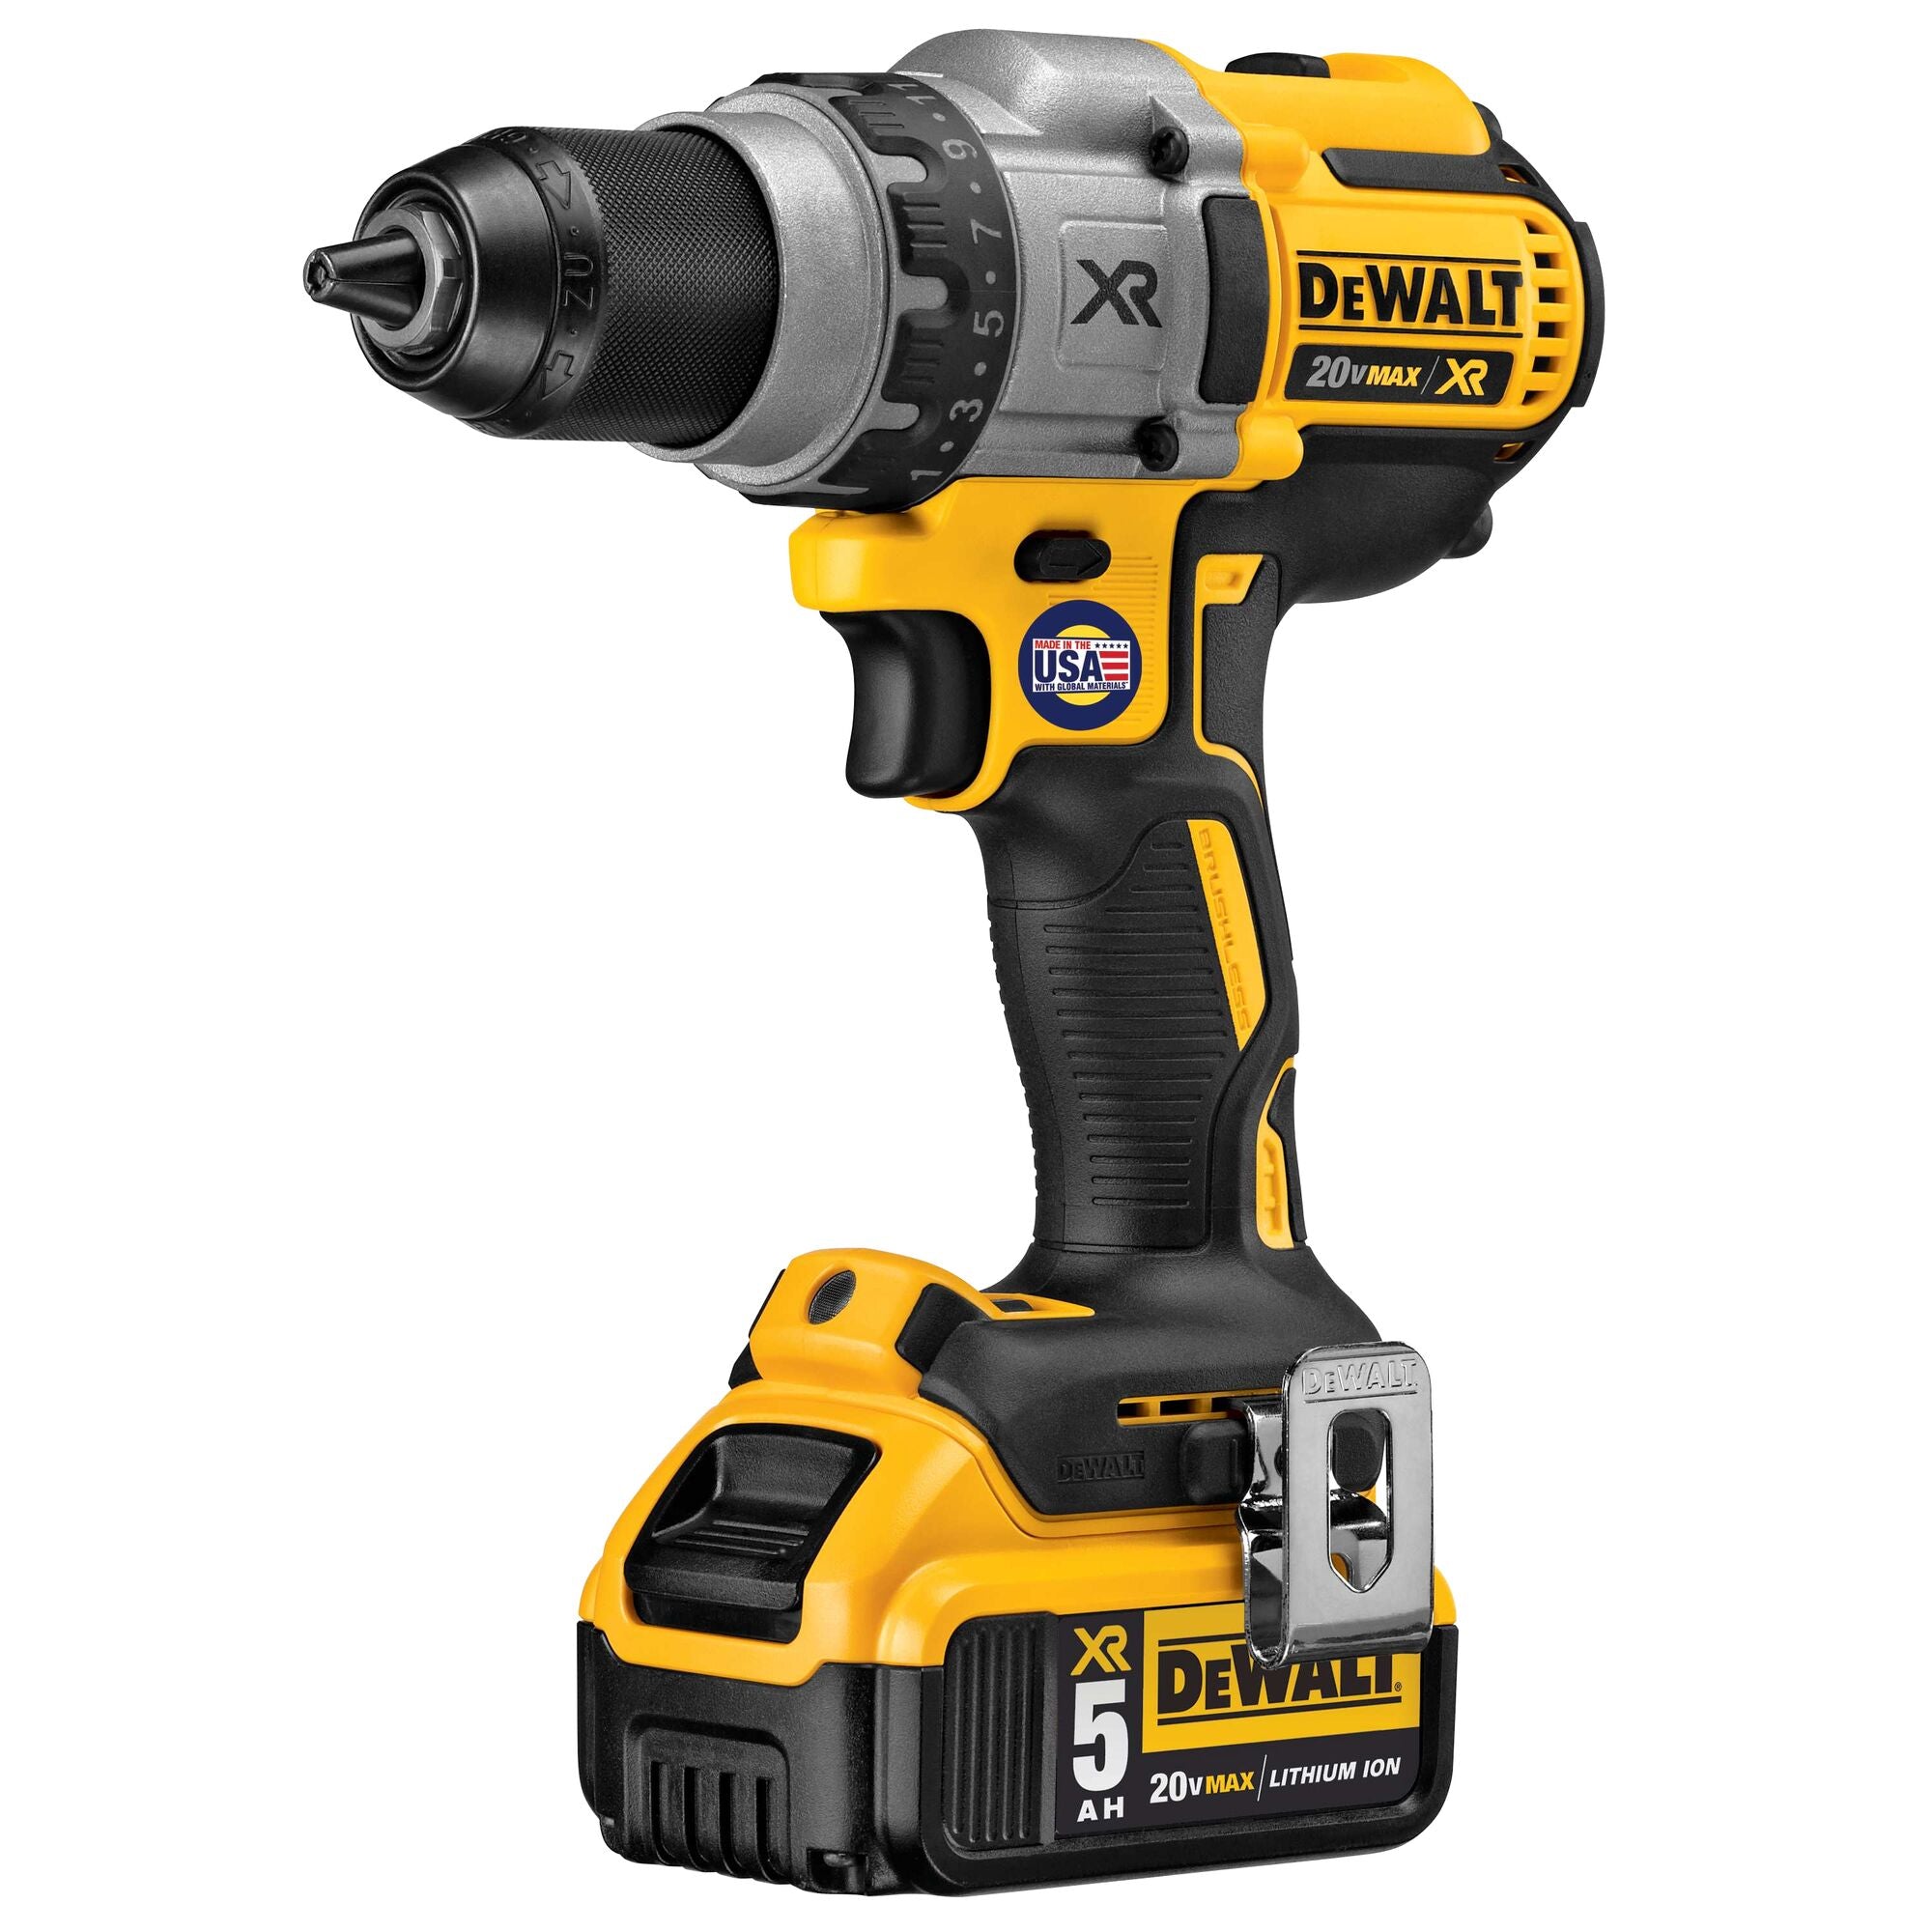 DeWALT DCD991P2 Max XR Drill 3 Speed Lithion Ion Drill/Driver Kit with 2 DCB205 and Charger